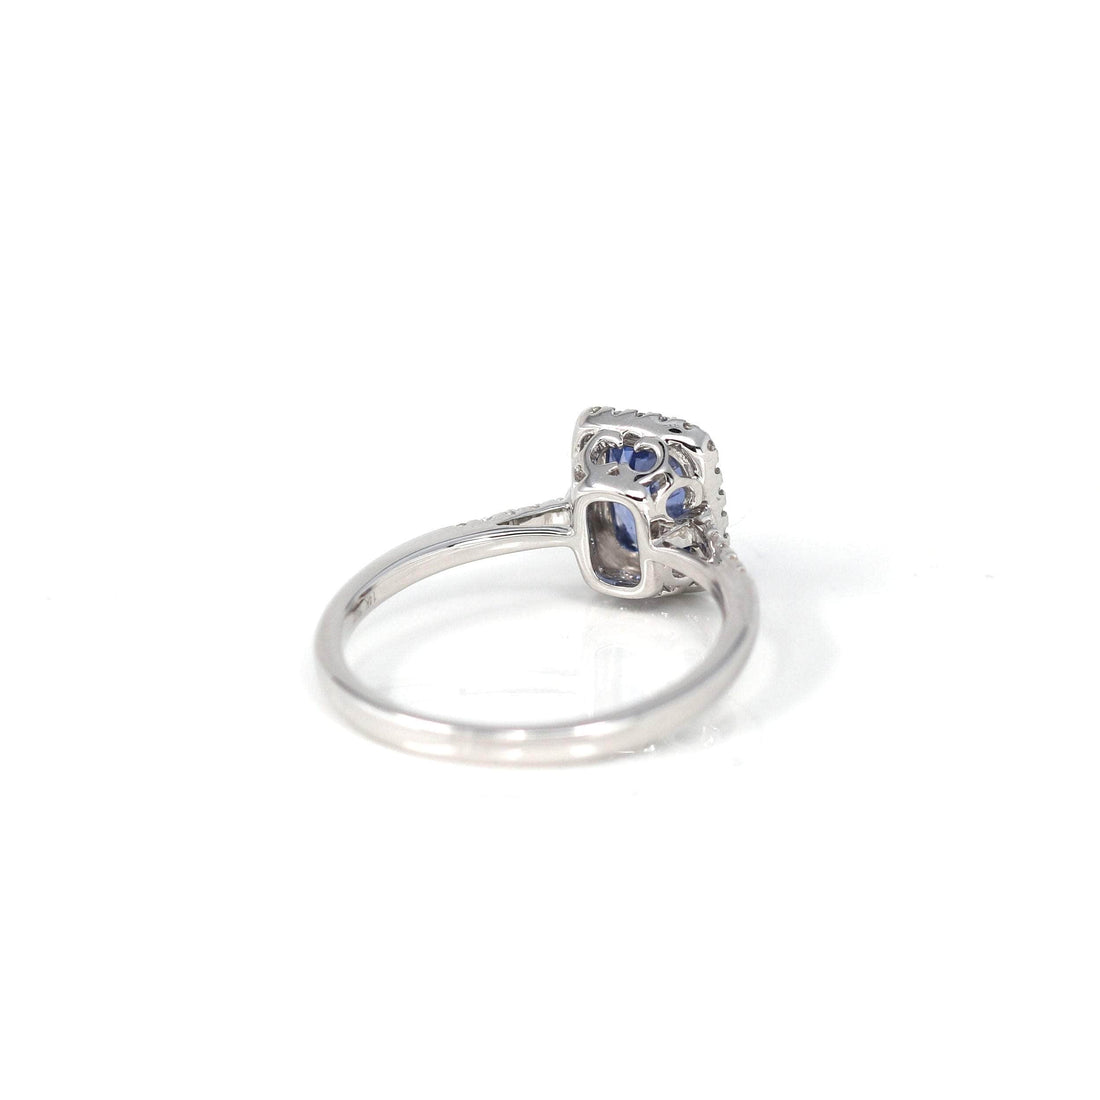 Baikalla Jewelry Gold Sapphire Ring 14k White Gold Natural Blue Sapphire Ring with Diamonds